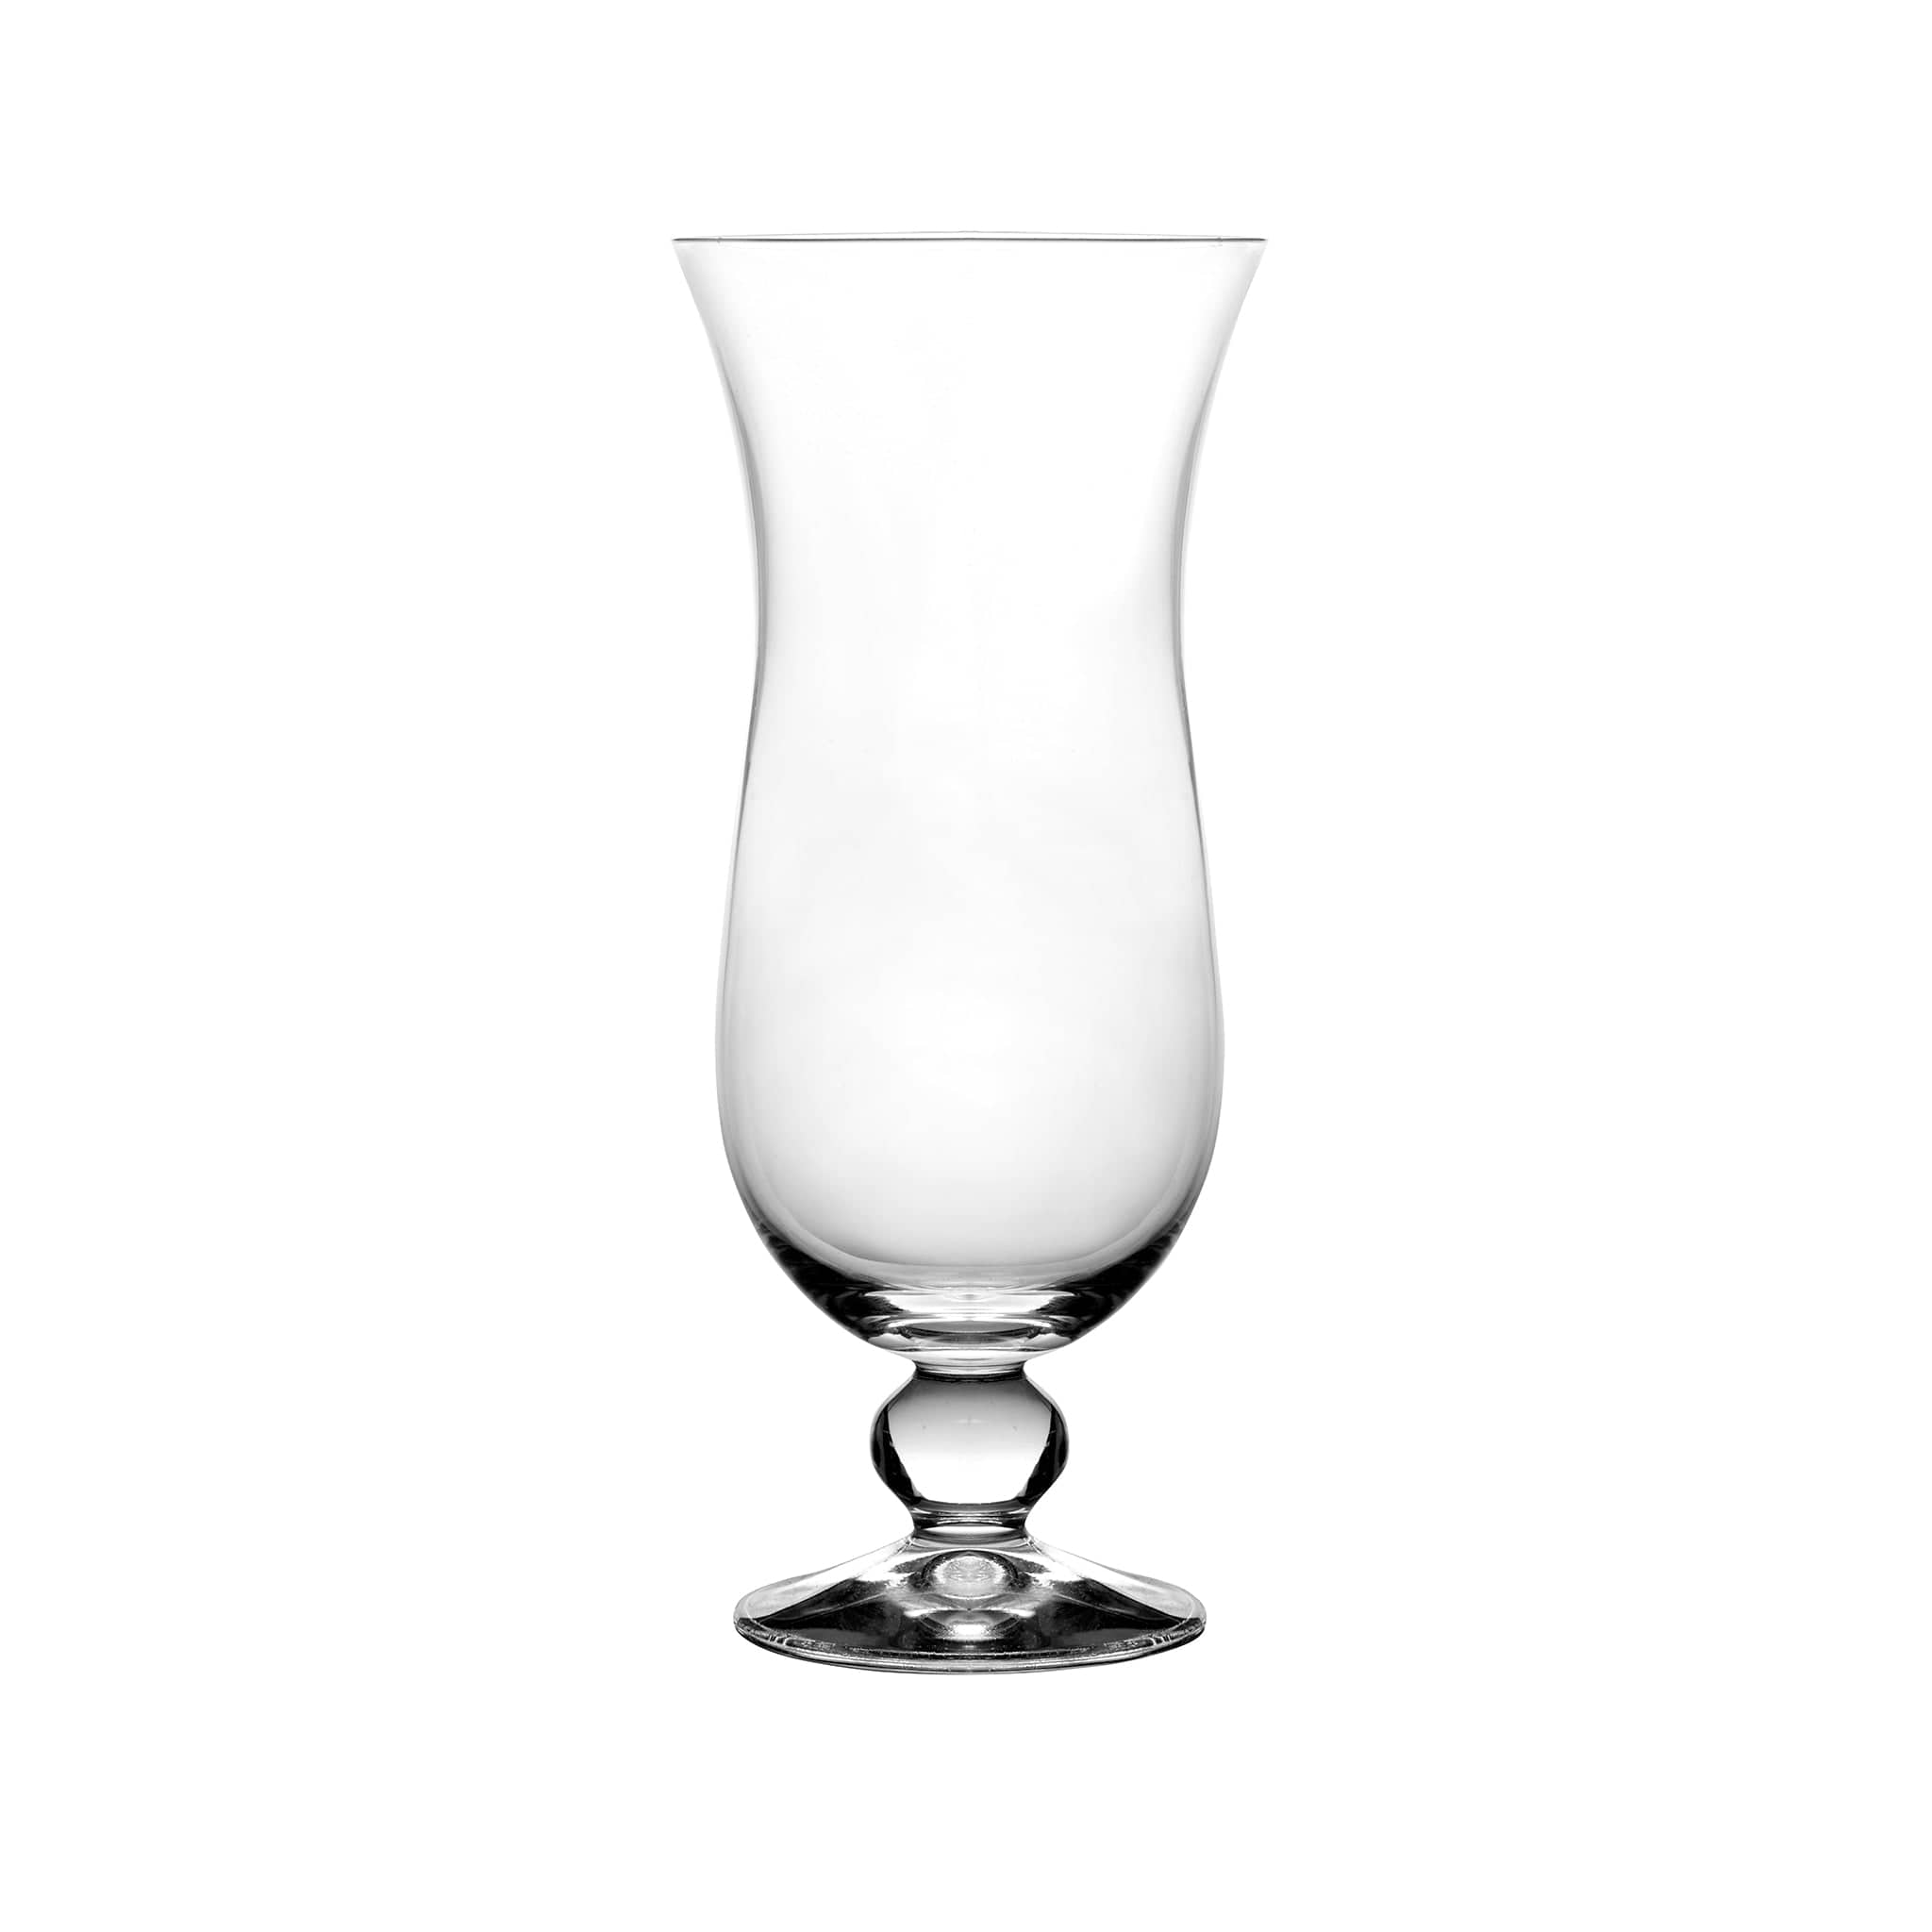 Artemis Crystalline Beer and Bar Glass 16.25oz Clear